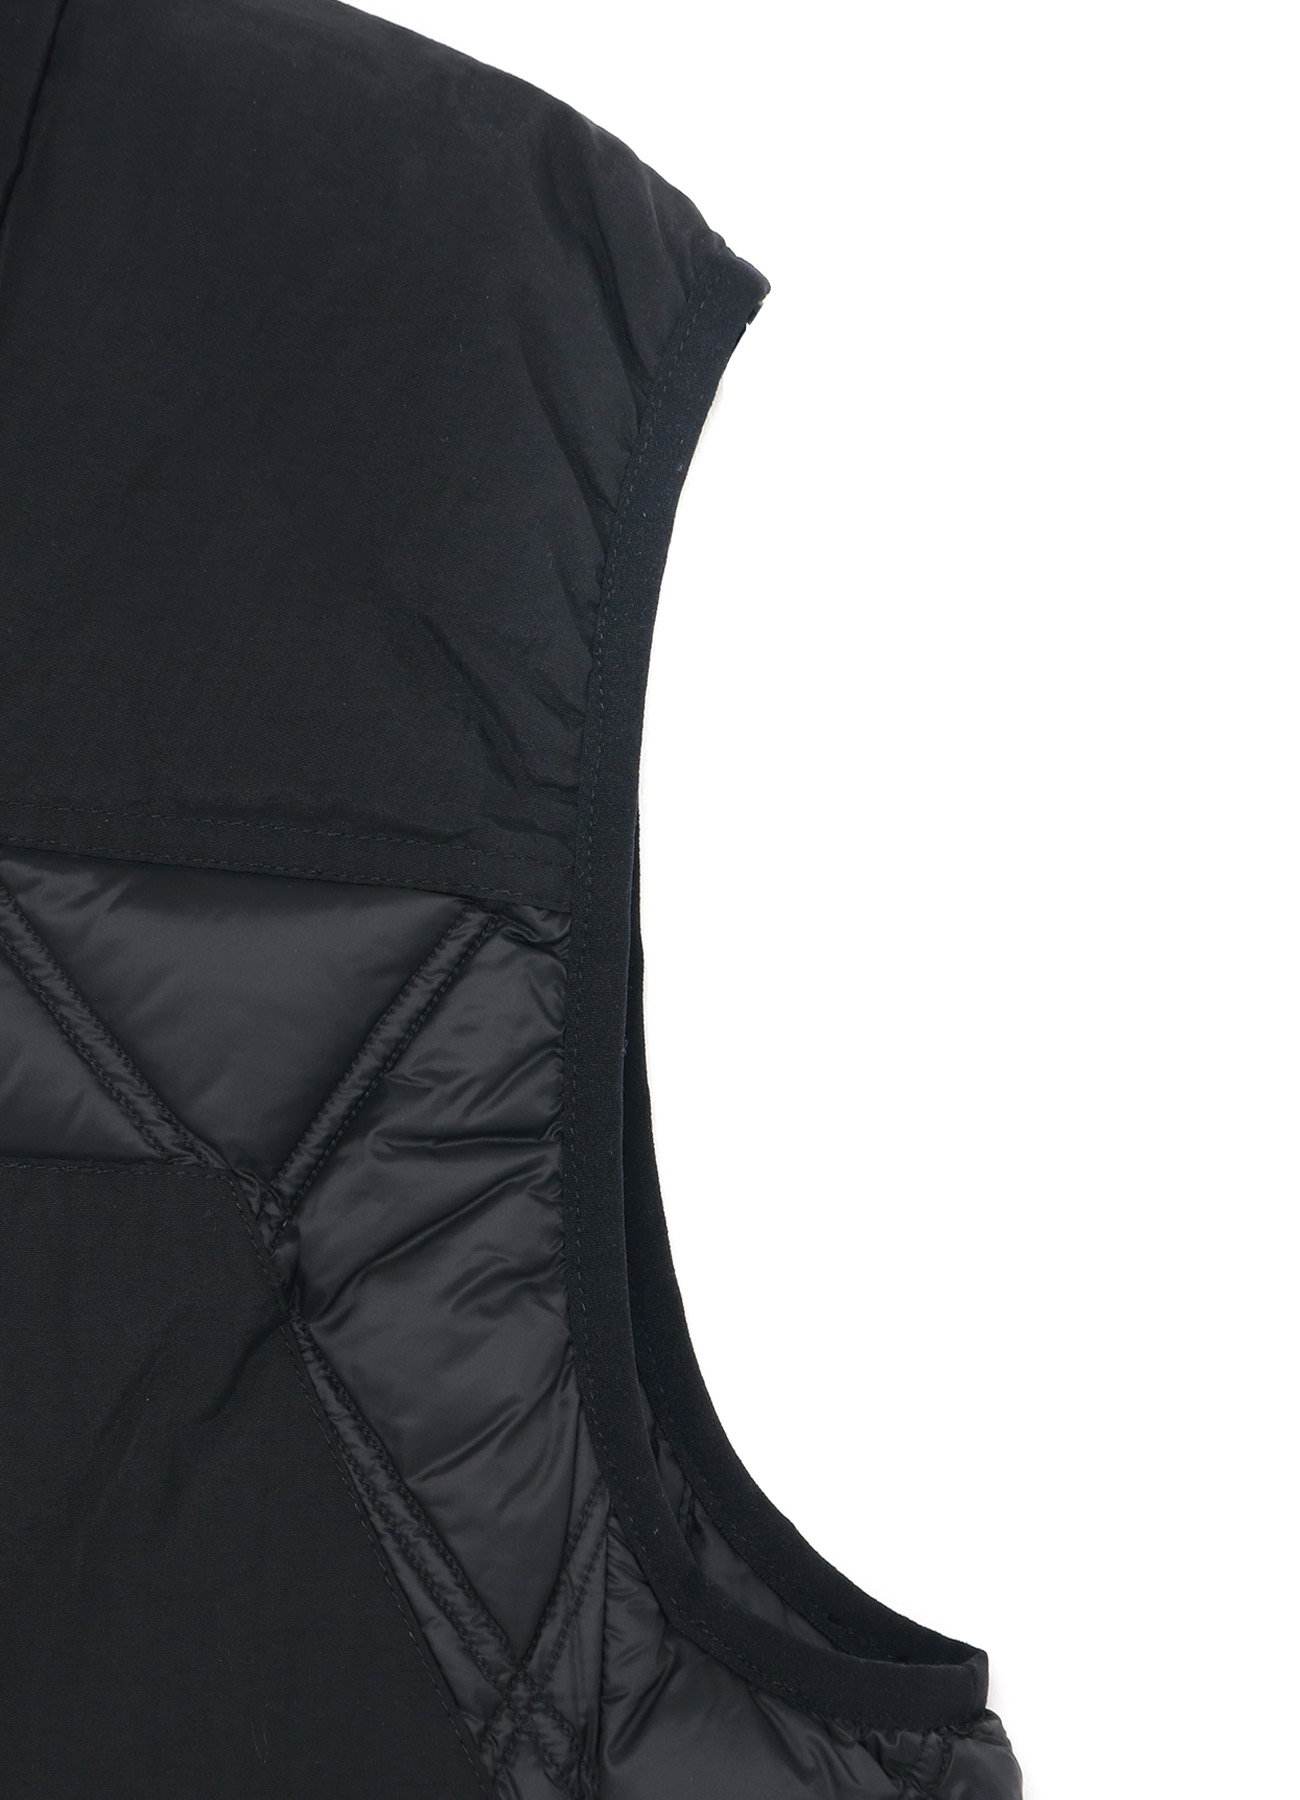 【S'YTE x TAION】Collaboration Collection QUILTED DOWN VEST